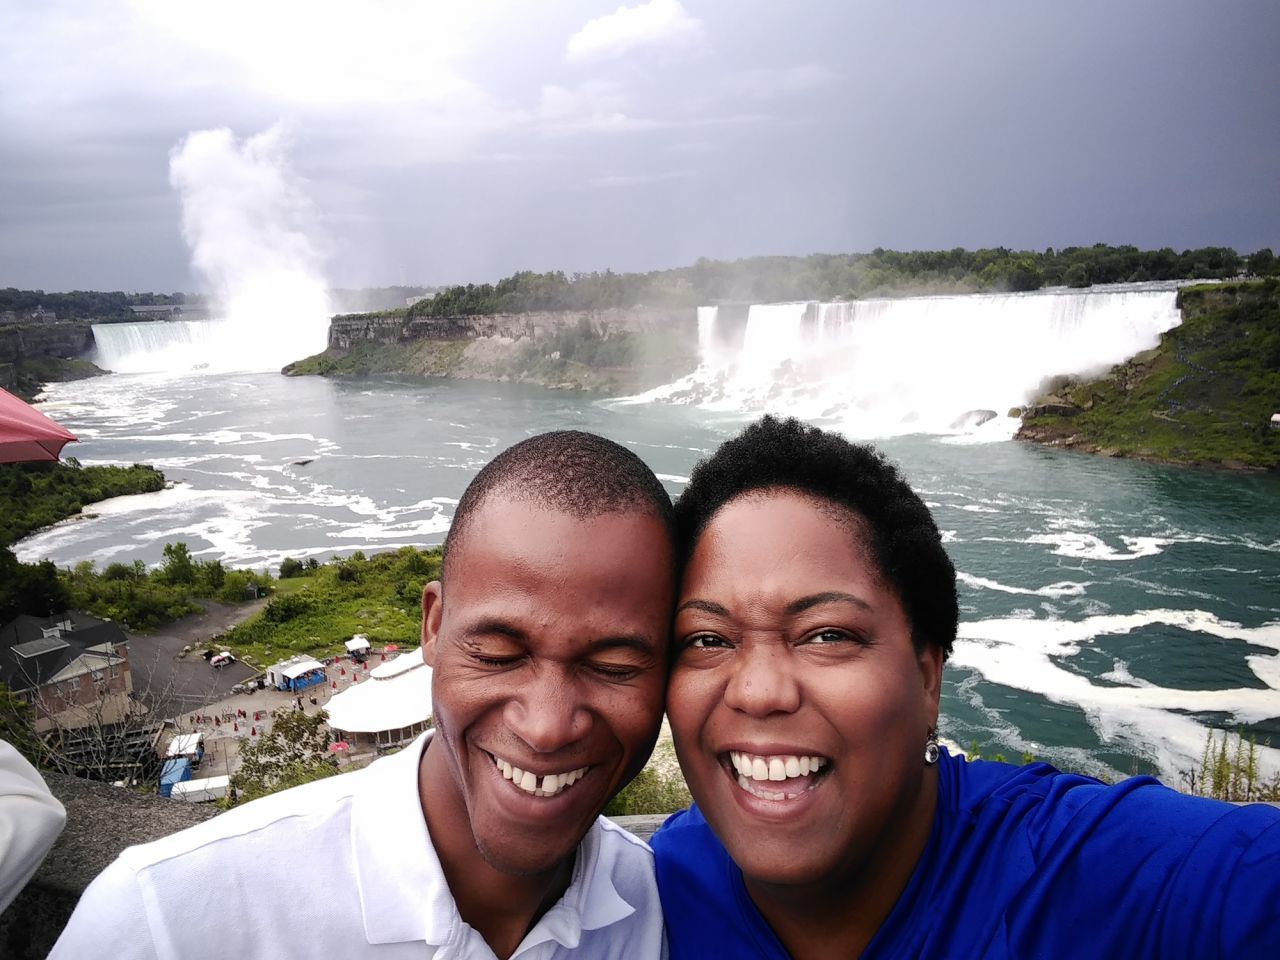 Today, Honoré and Rachel live in Canada together. Here they are pictured at Niagara Falls.